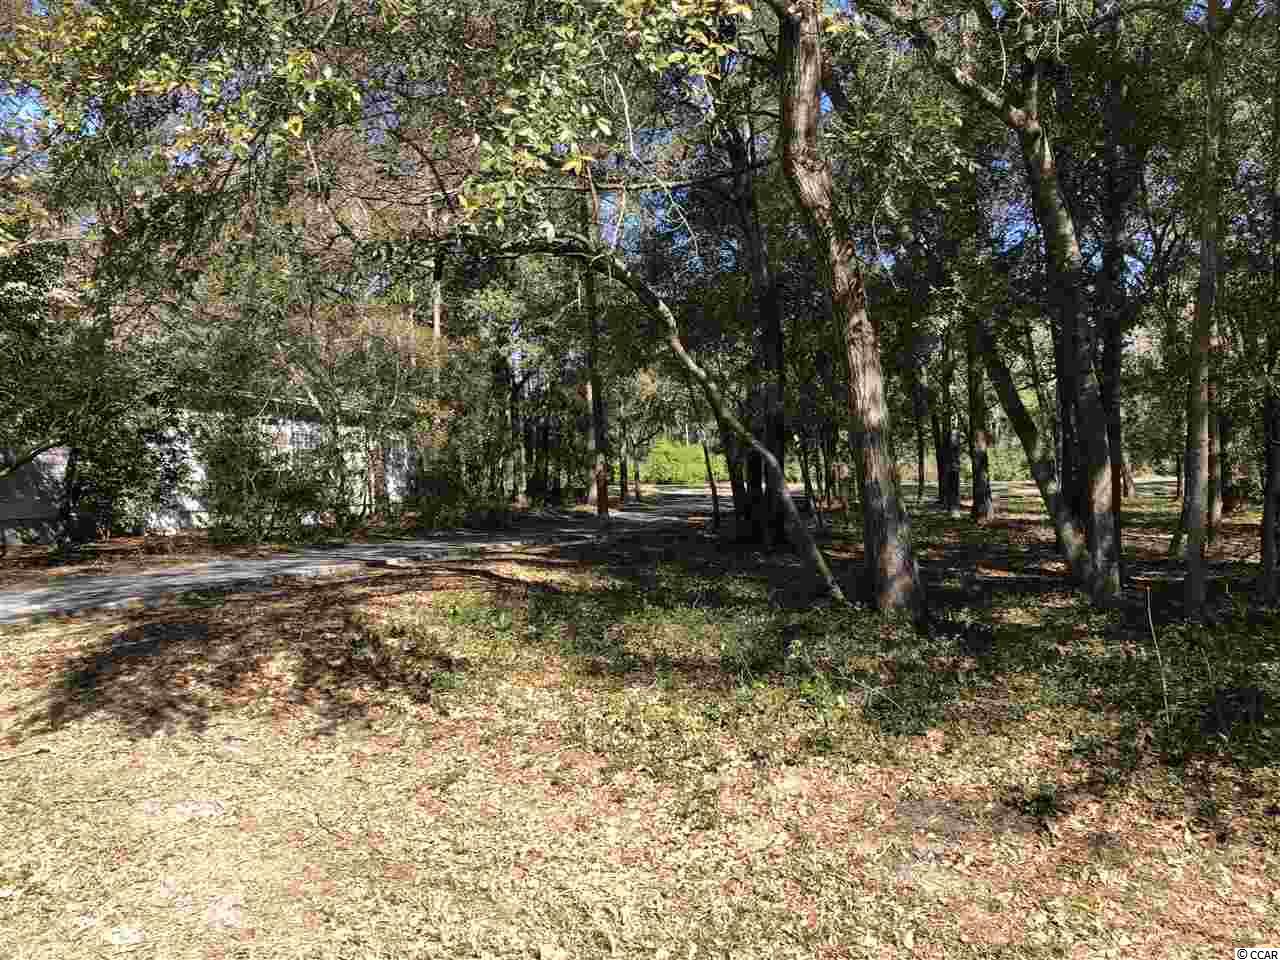 Lot 628 Chester Rd. North Myrtle Beach, SC 29582